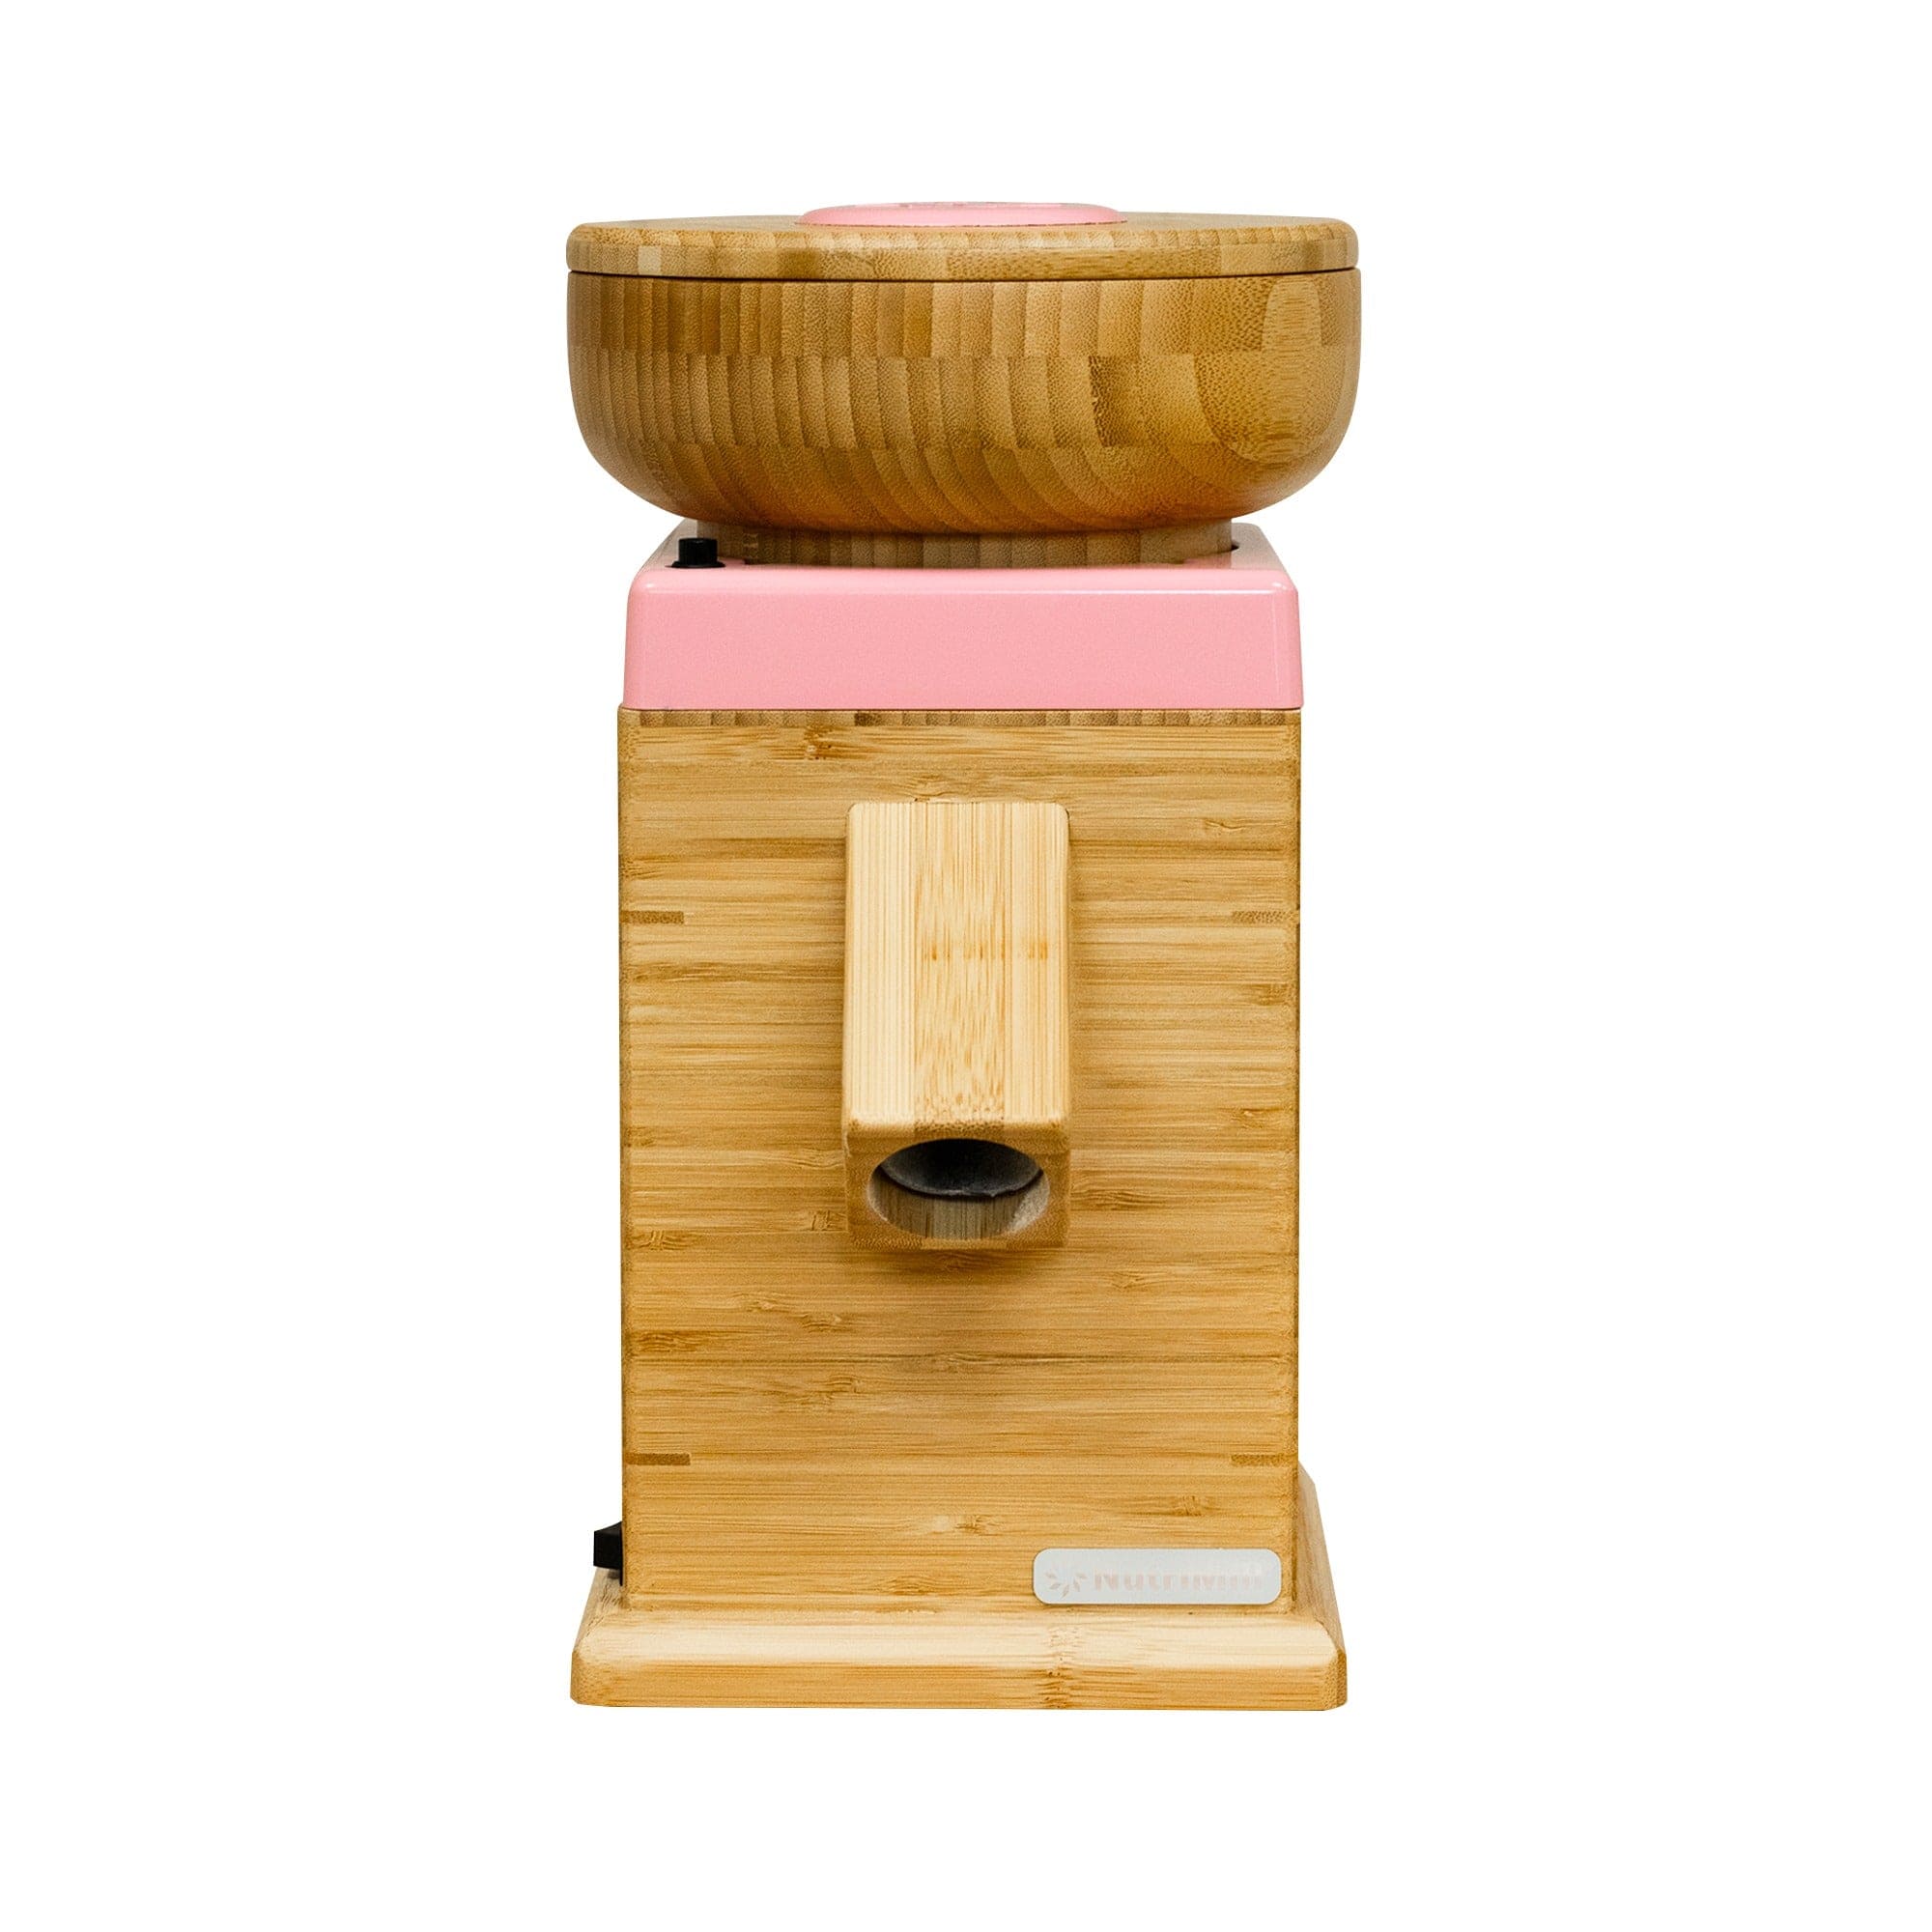 Nutrimill Harvest Grain Mill Food Mill Available in Assorted Colours